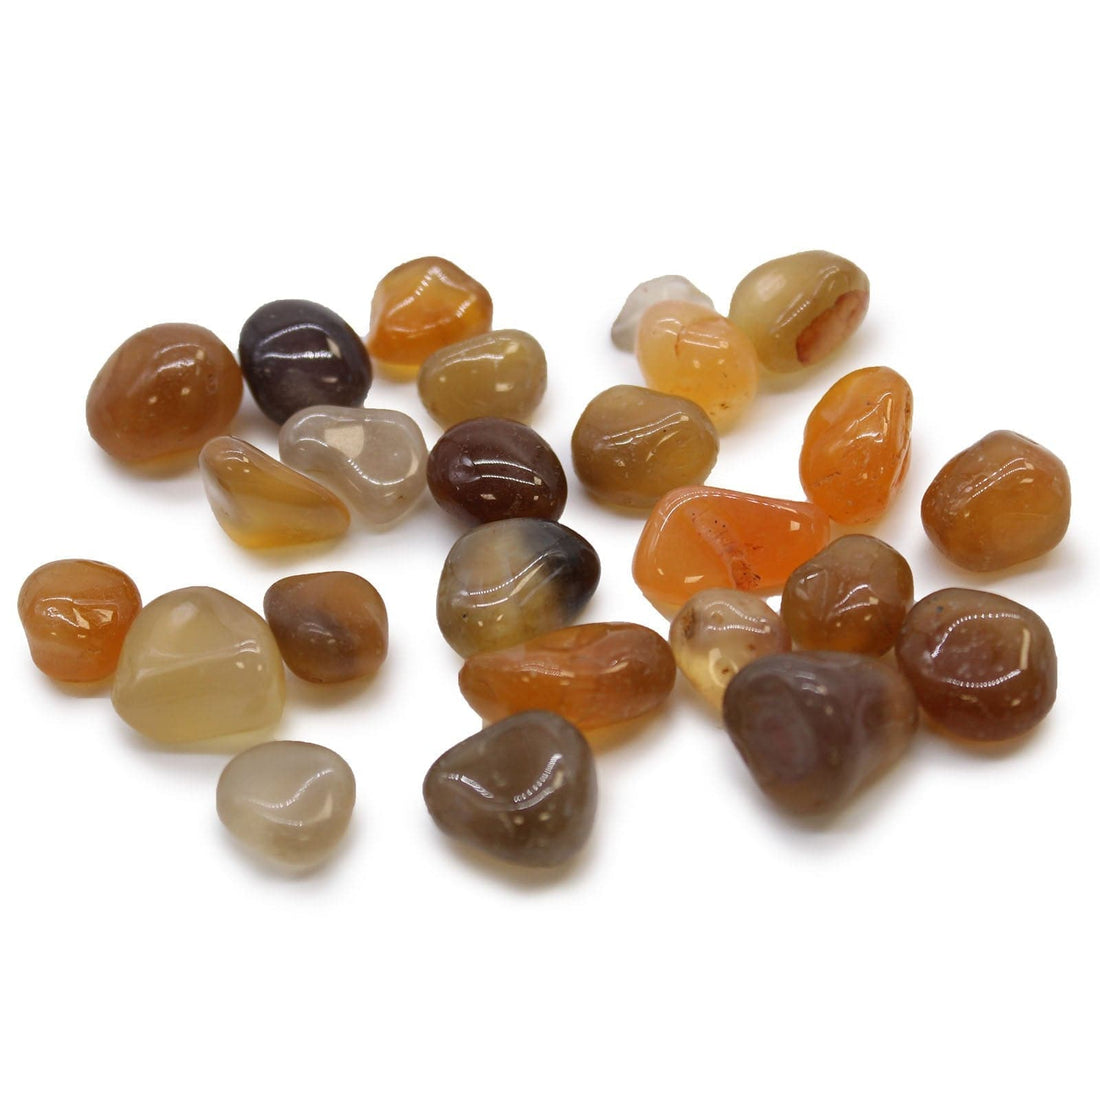 Small African Tumble Stones - Carnelian Agate - Mozambique - best price from Maltashopper.com ATUMBLES-16